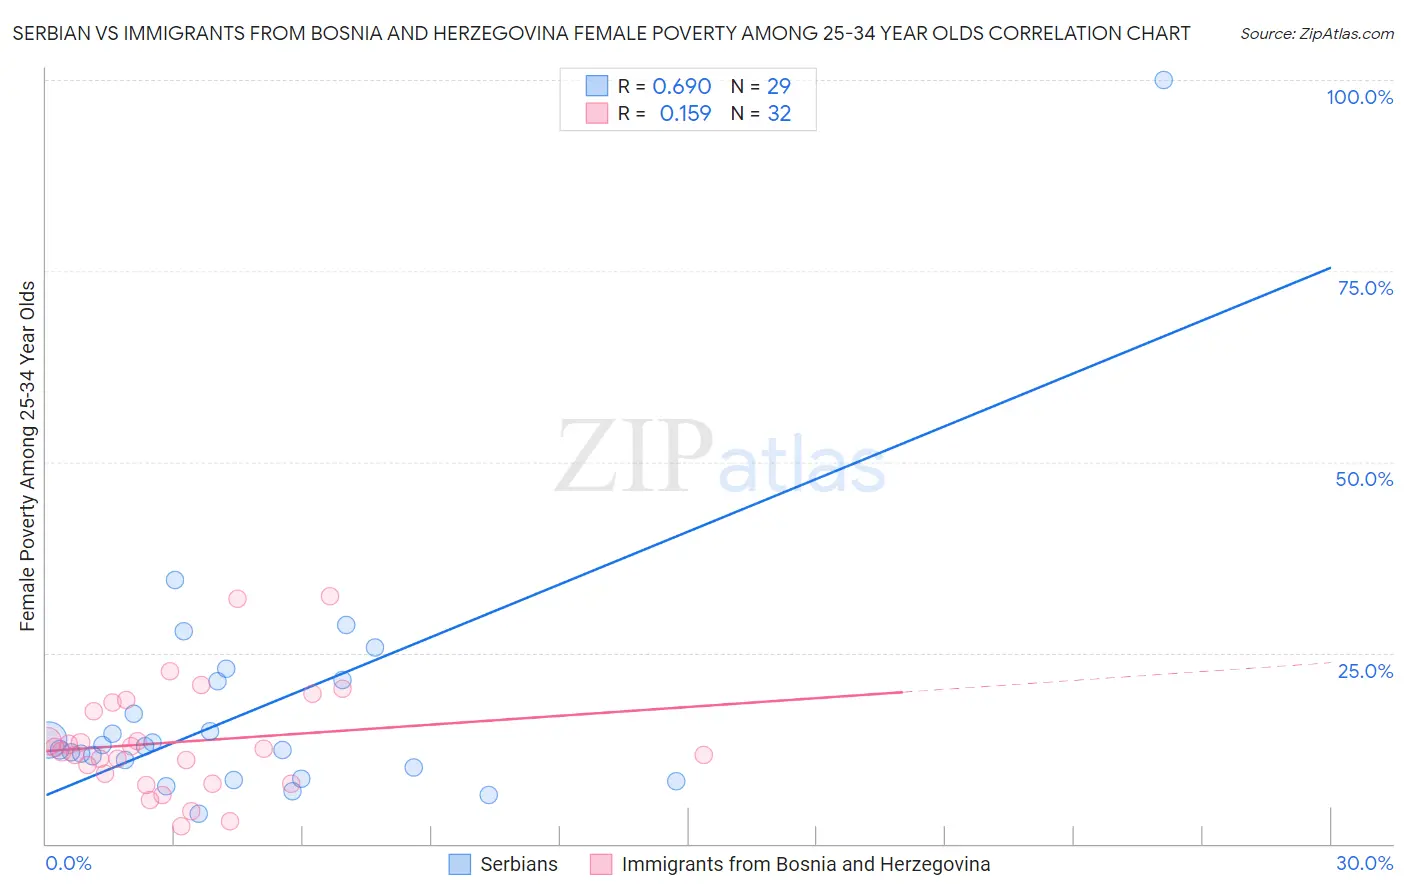 Serbian vs Immigrants from Bosnia and Herzegovina Female Poverty Among 25-34 Year Olds